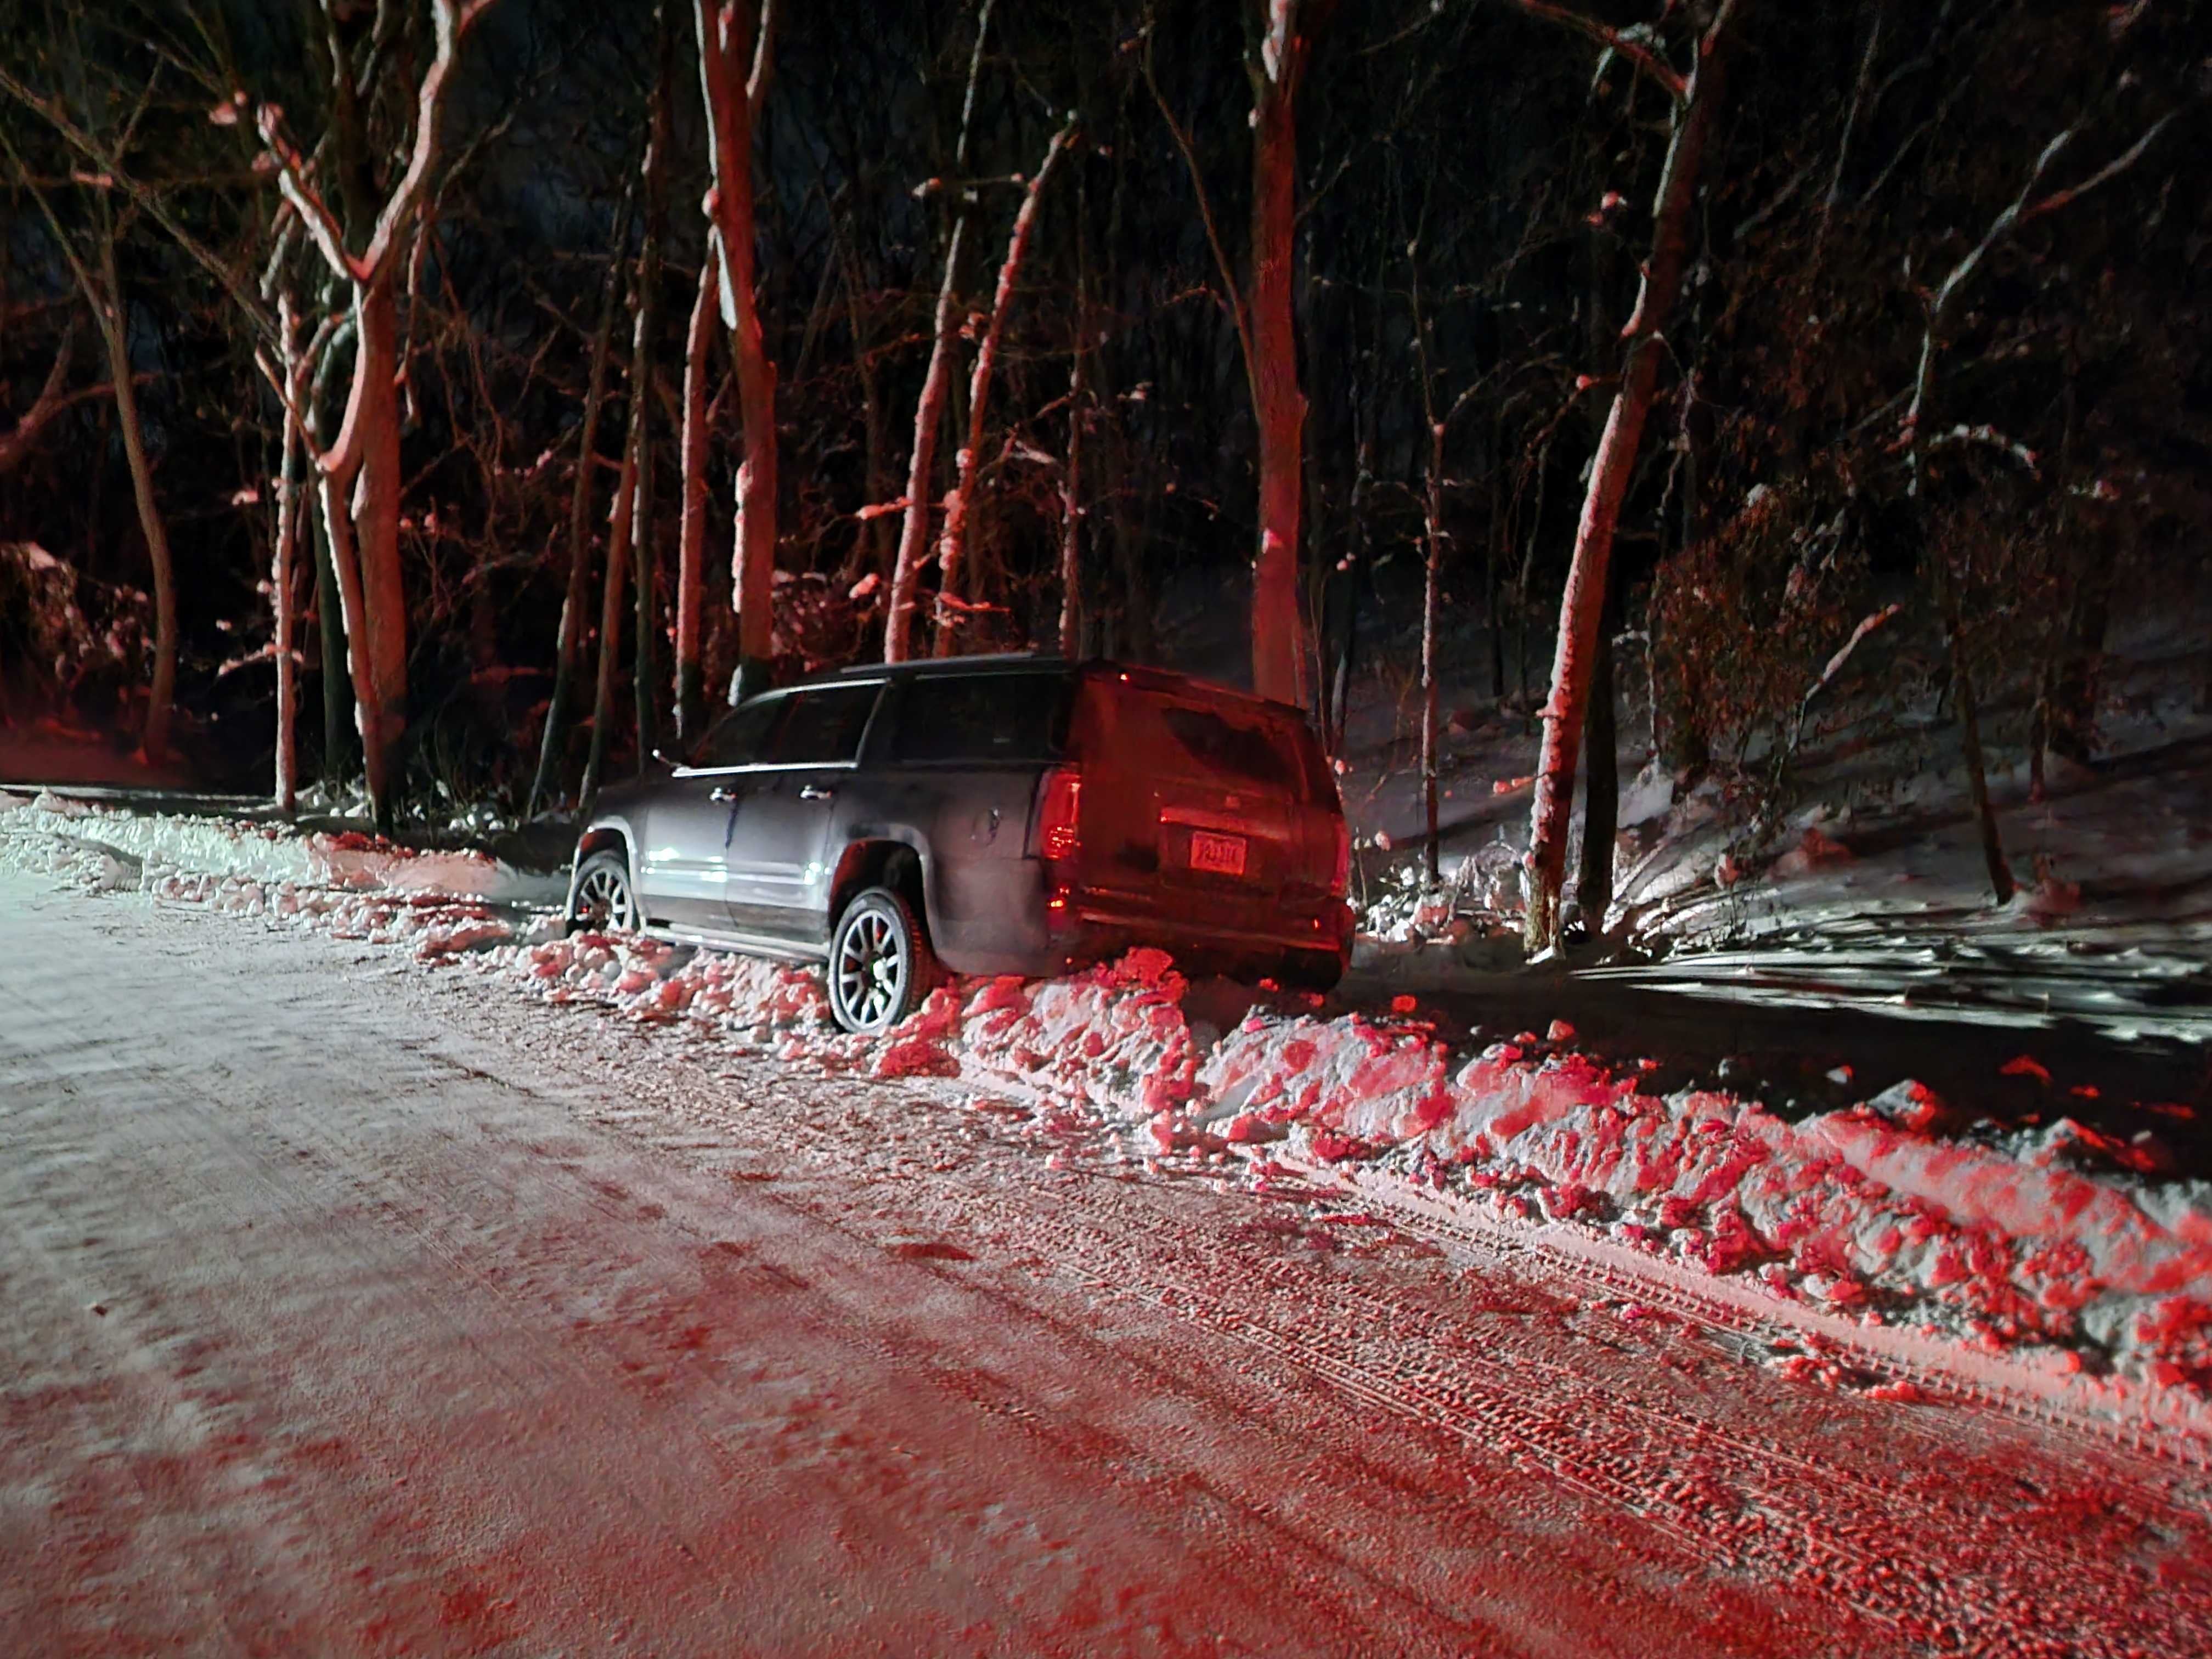 An SUV is abandoned outside of Nikki Haley’s event in Adel, Iowa after the driver was unable to move out of the snowbank